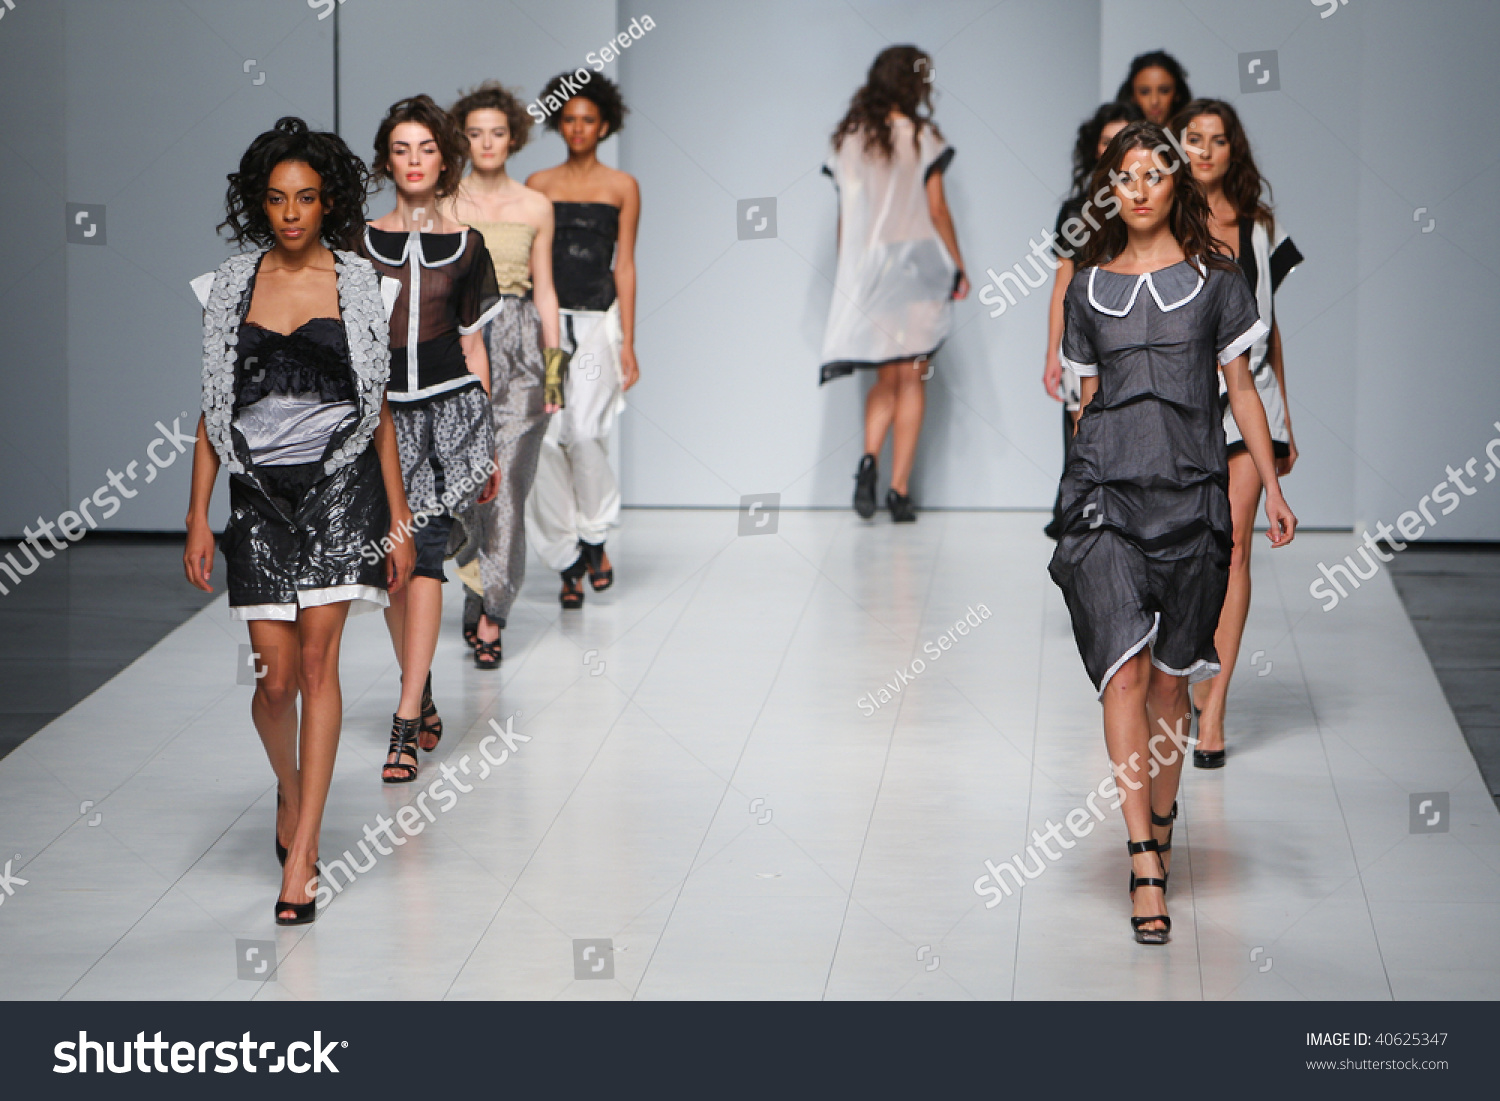 Kiev, Ukraine - Oct 18: Model Poses At The Runway During Fashion Show ...